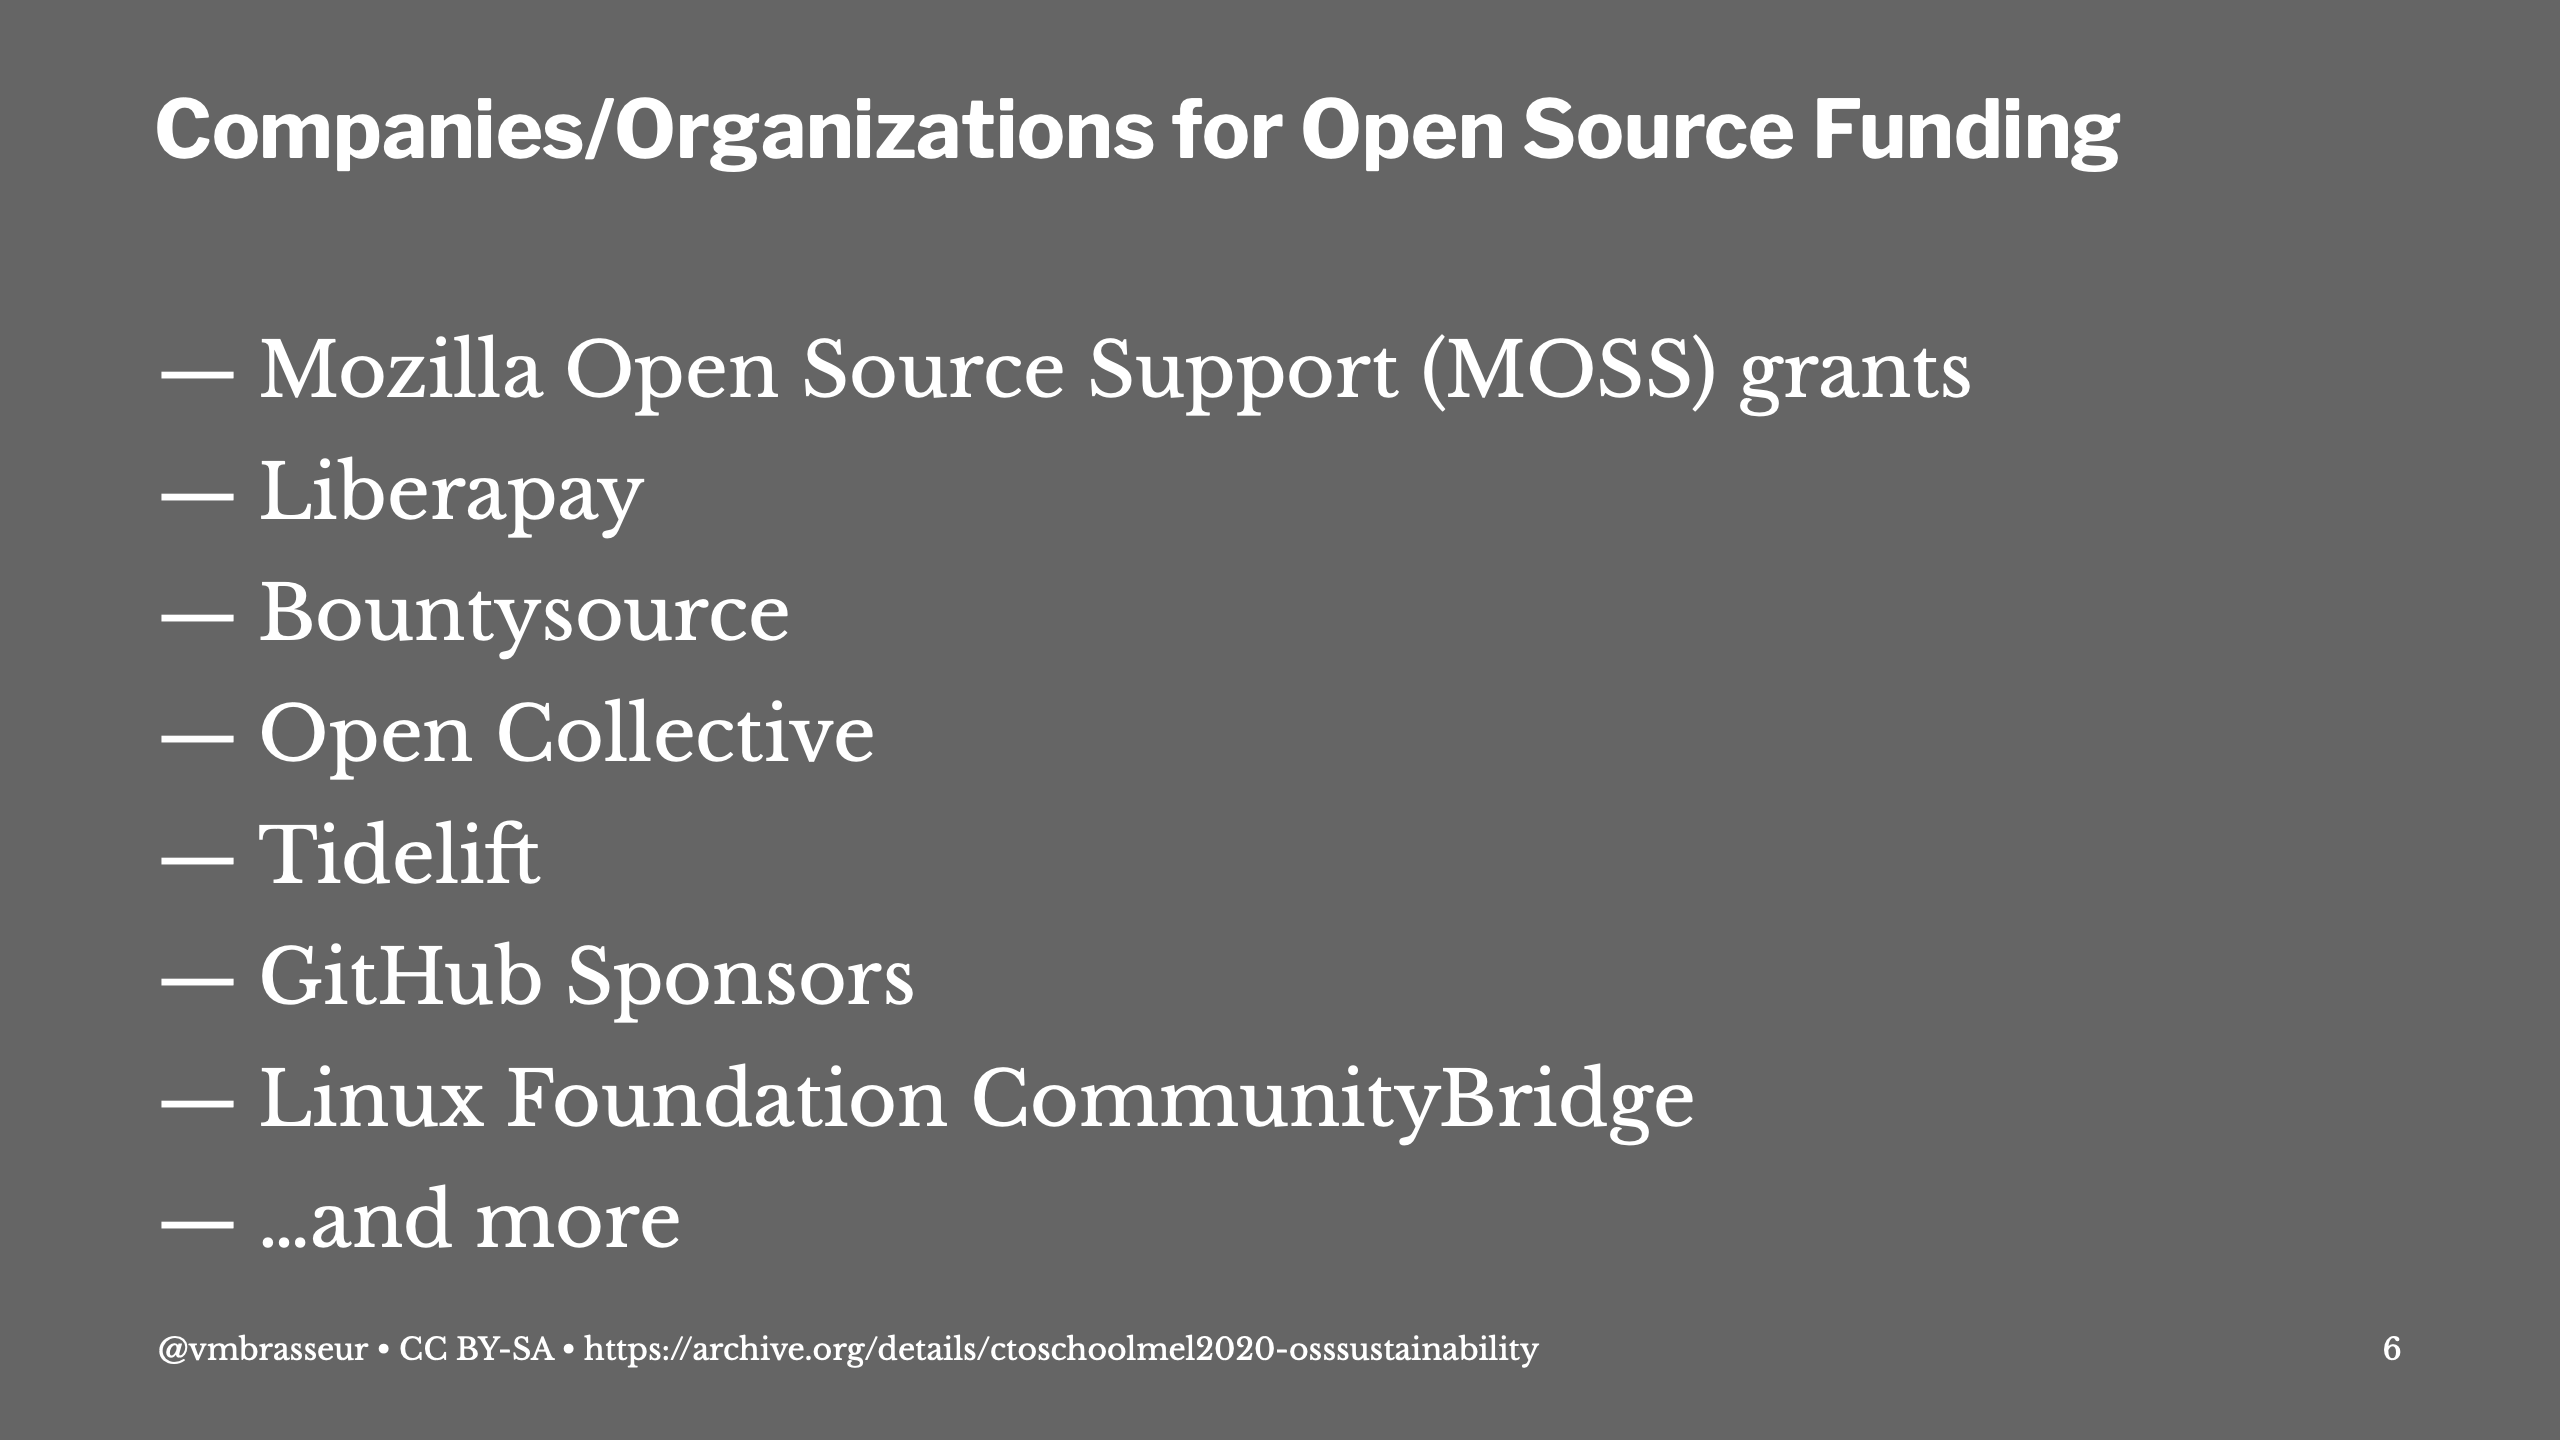 Companies/Orgs for FOSS funding: Mozilla Open Source Support (MOSS) grants, Liberapay, Bountysource, Open Collective, Tidelift, GitHub Sponsors, Linux Foundation CommunityBridge, and more